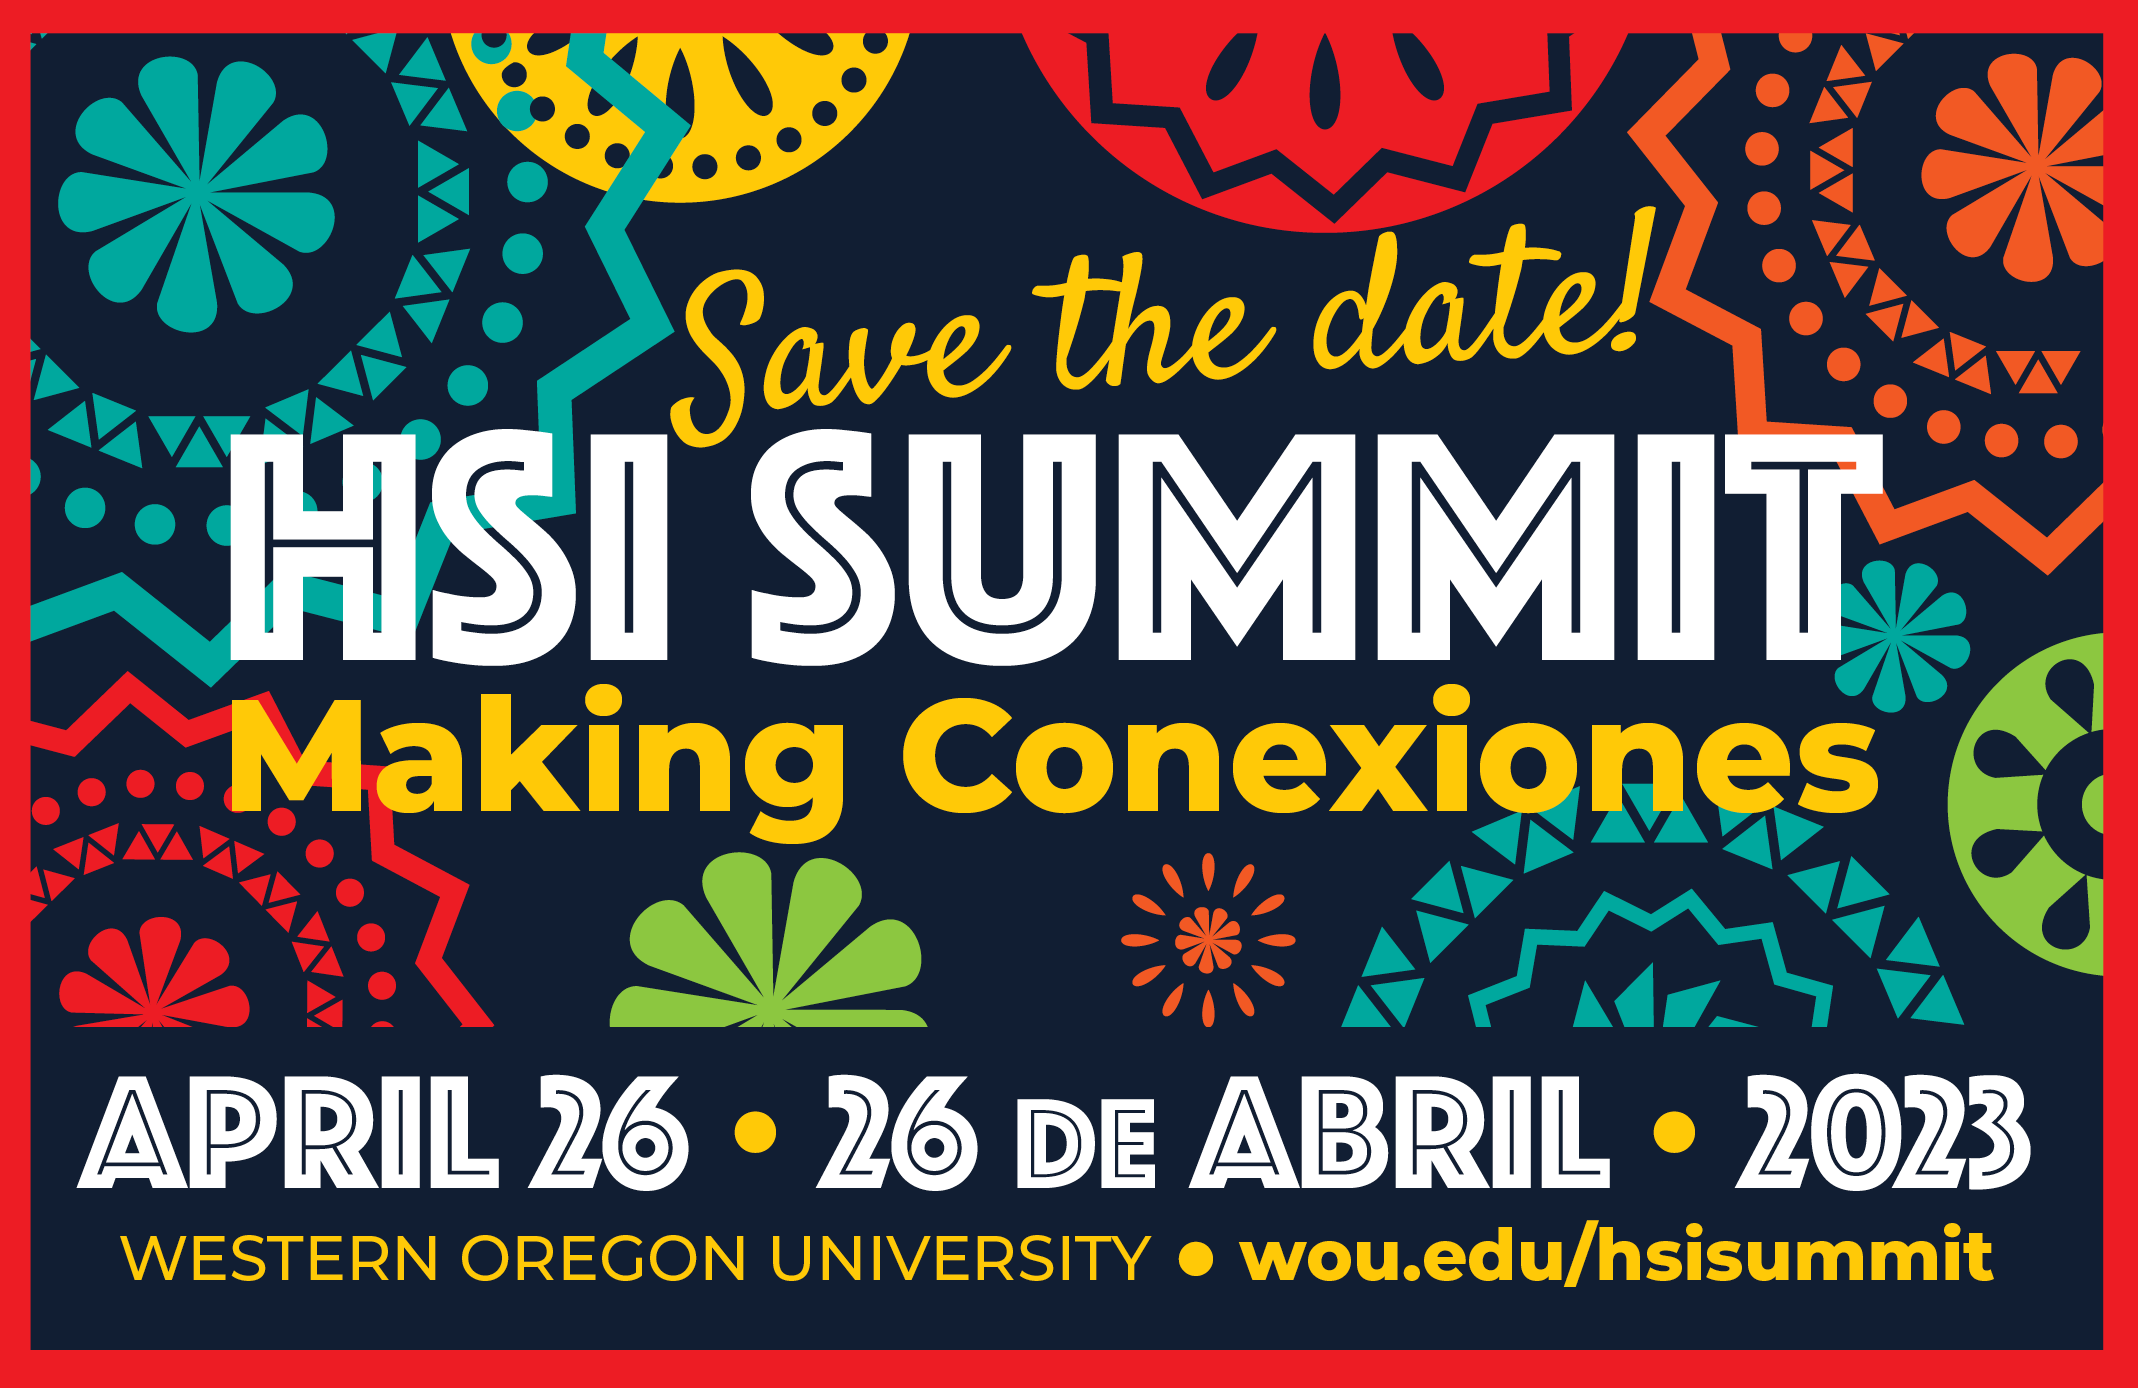 Save the Date HSI Summit Making Conexcions April 26 2023 Western Oregon University